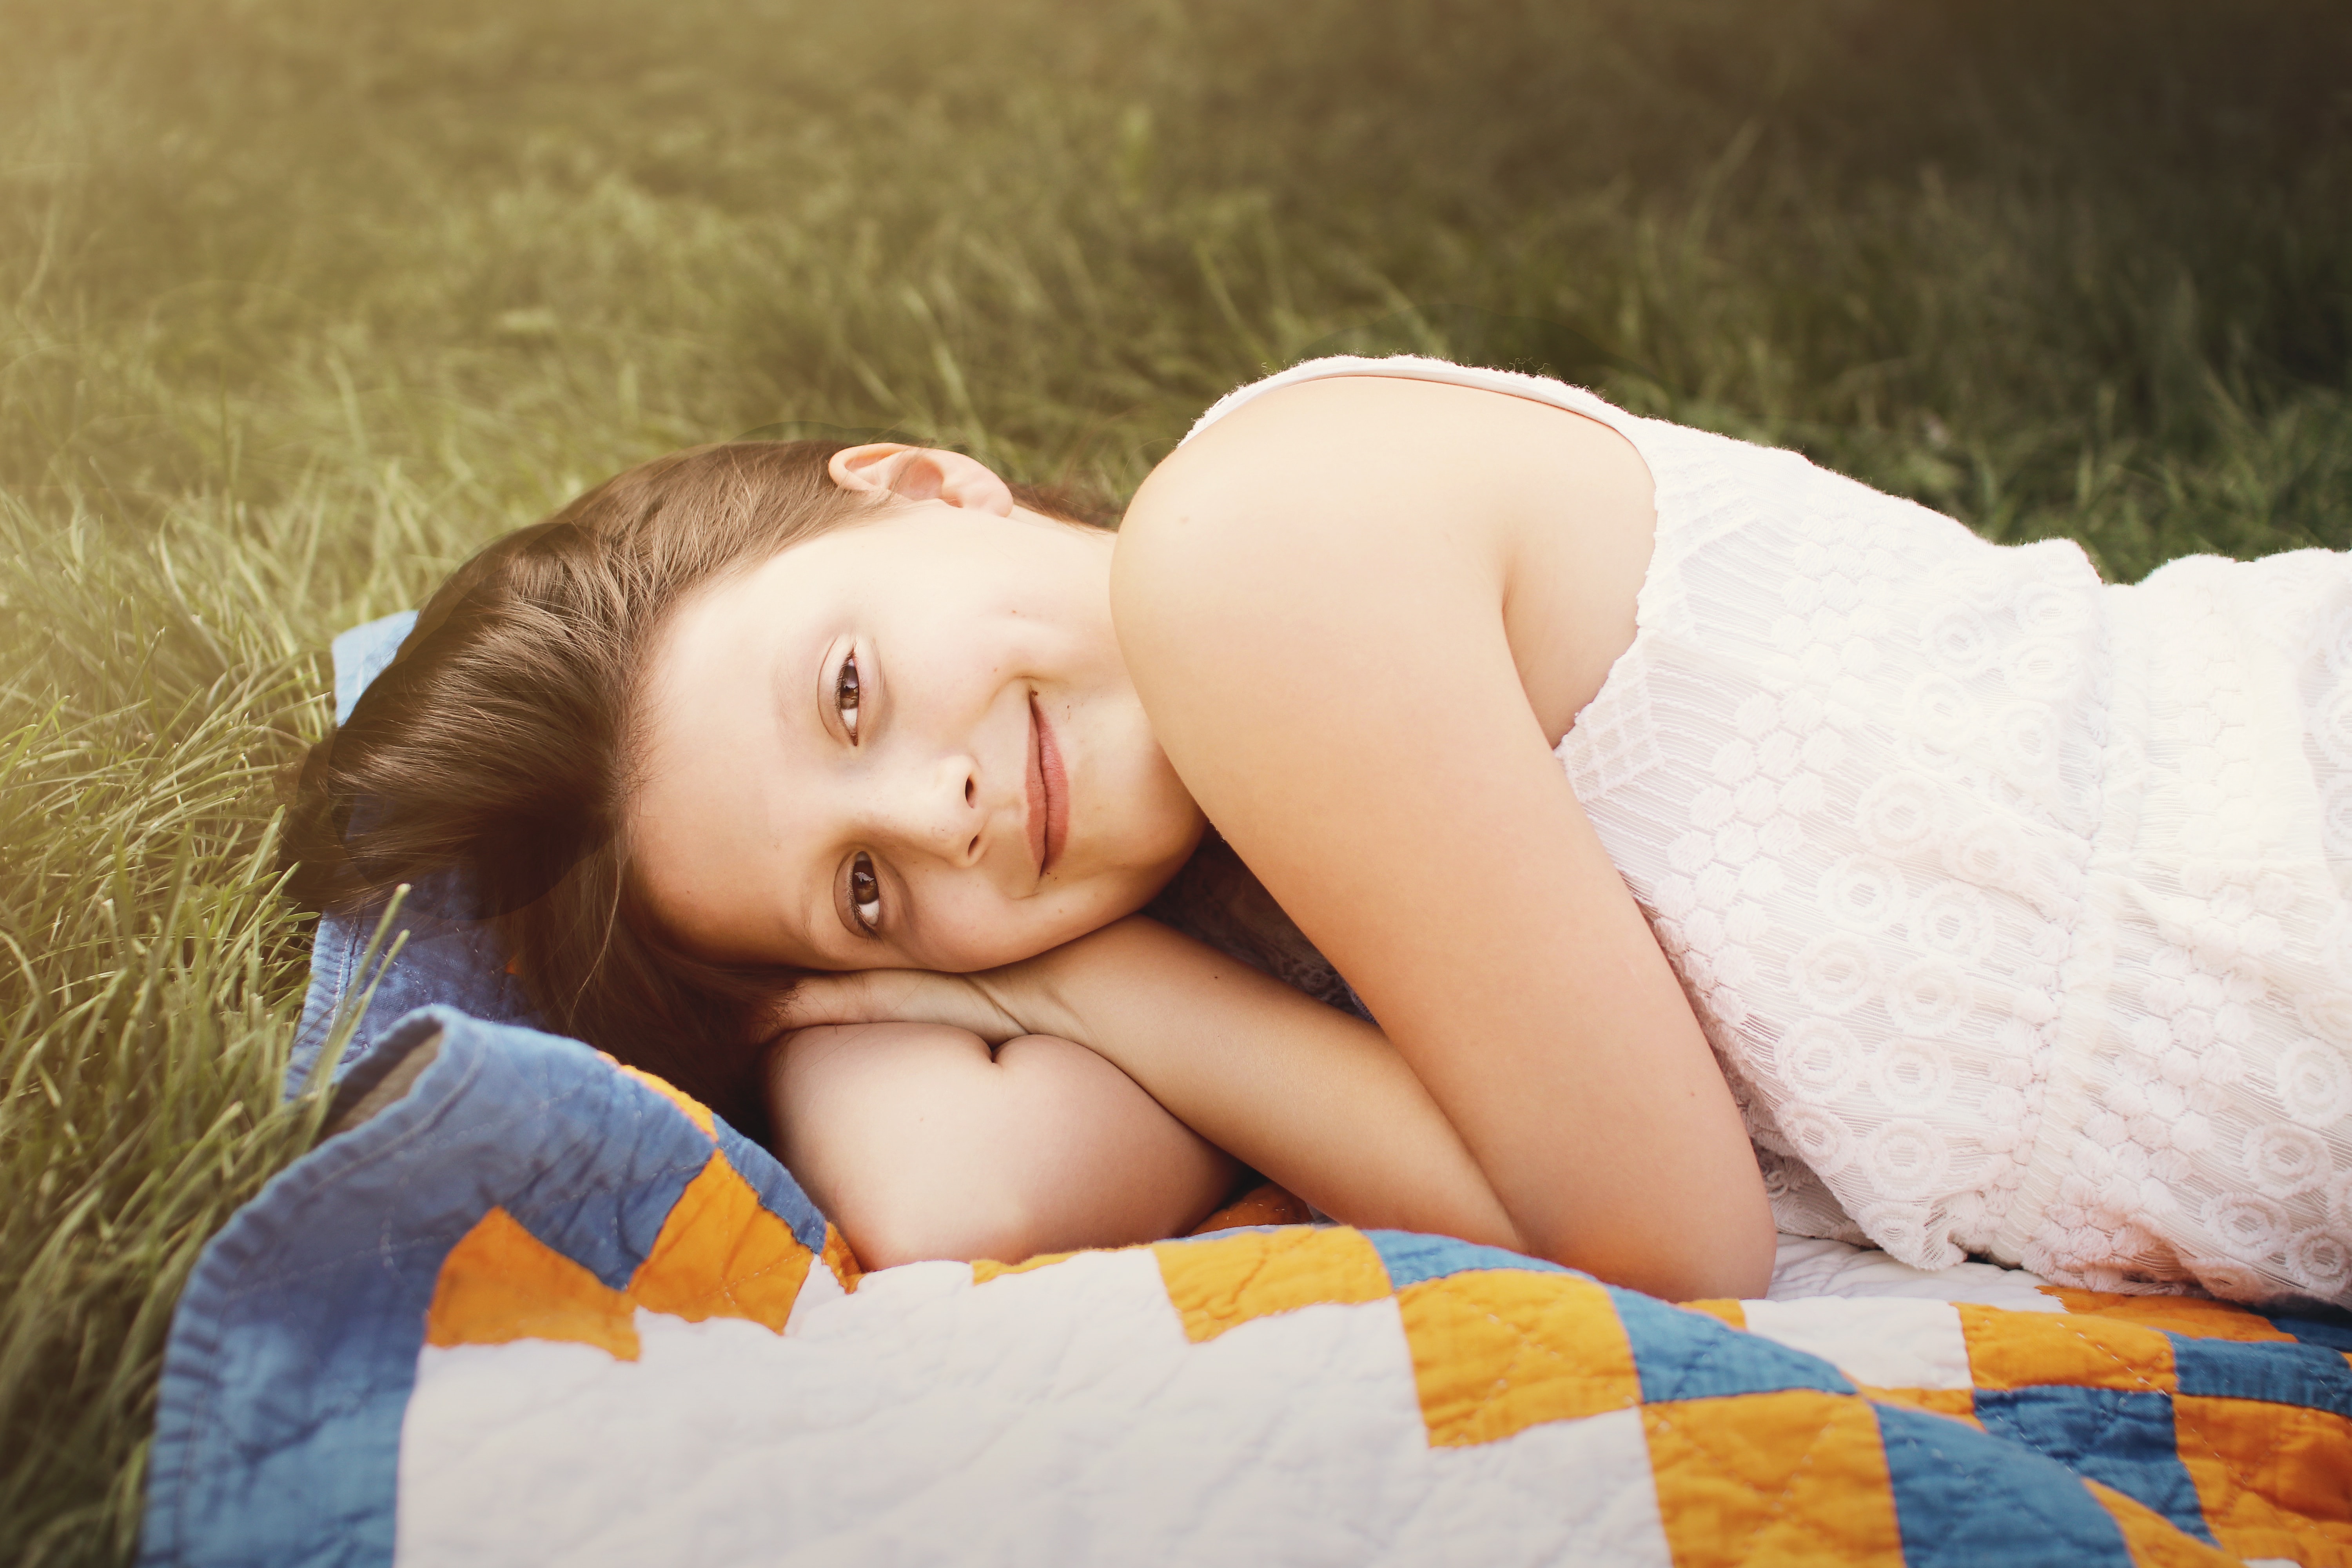 preteen girl lying on blanket in grass looking at camera